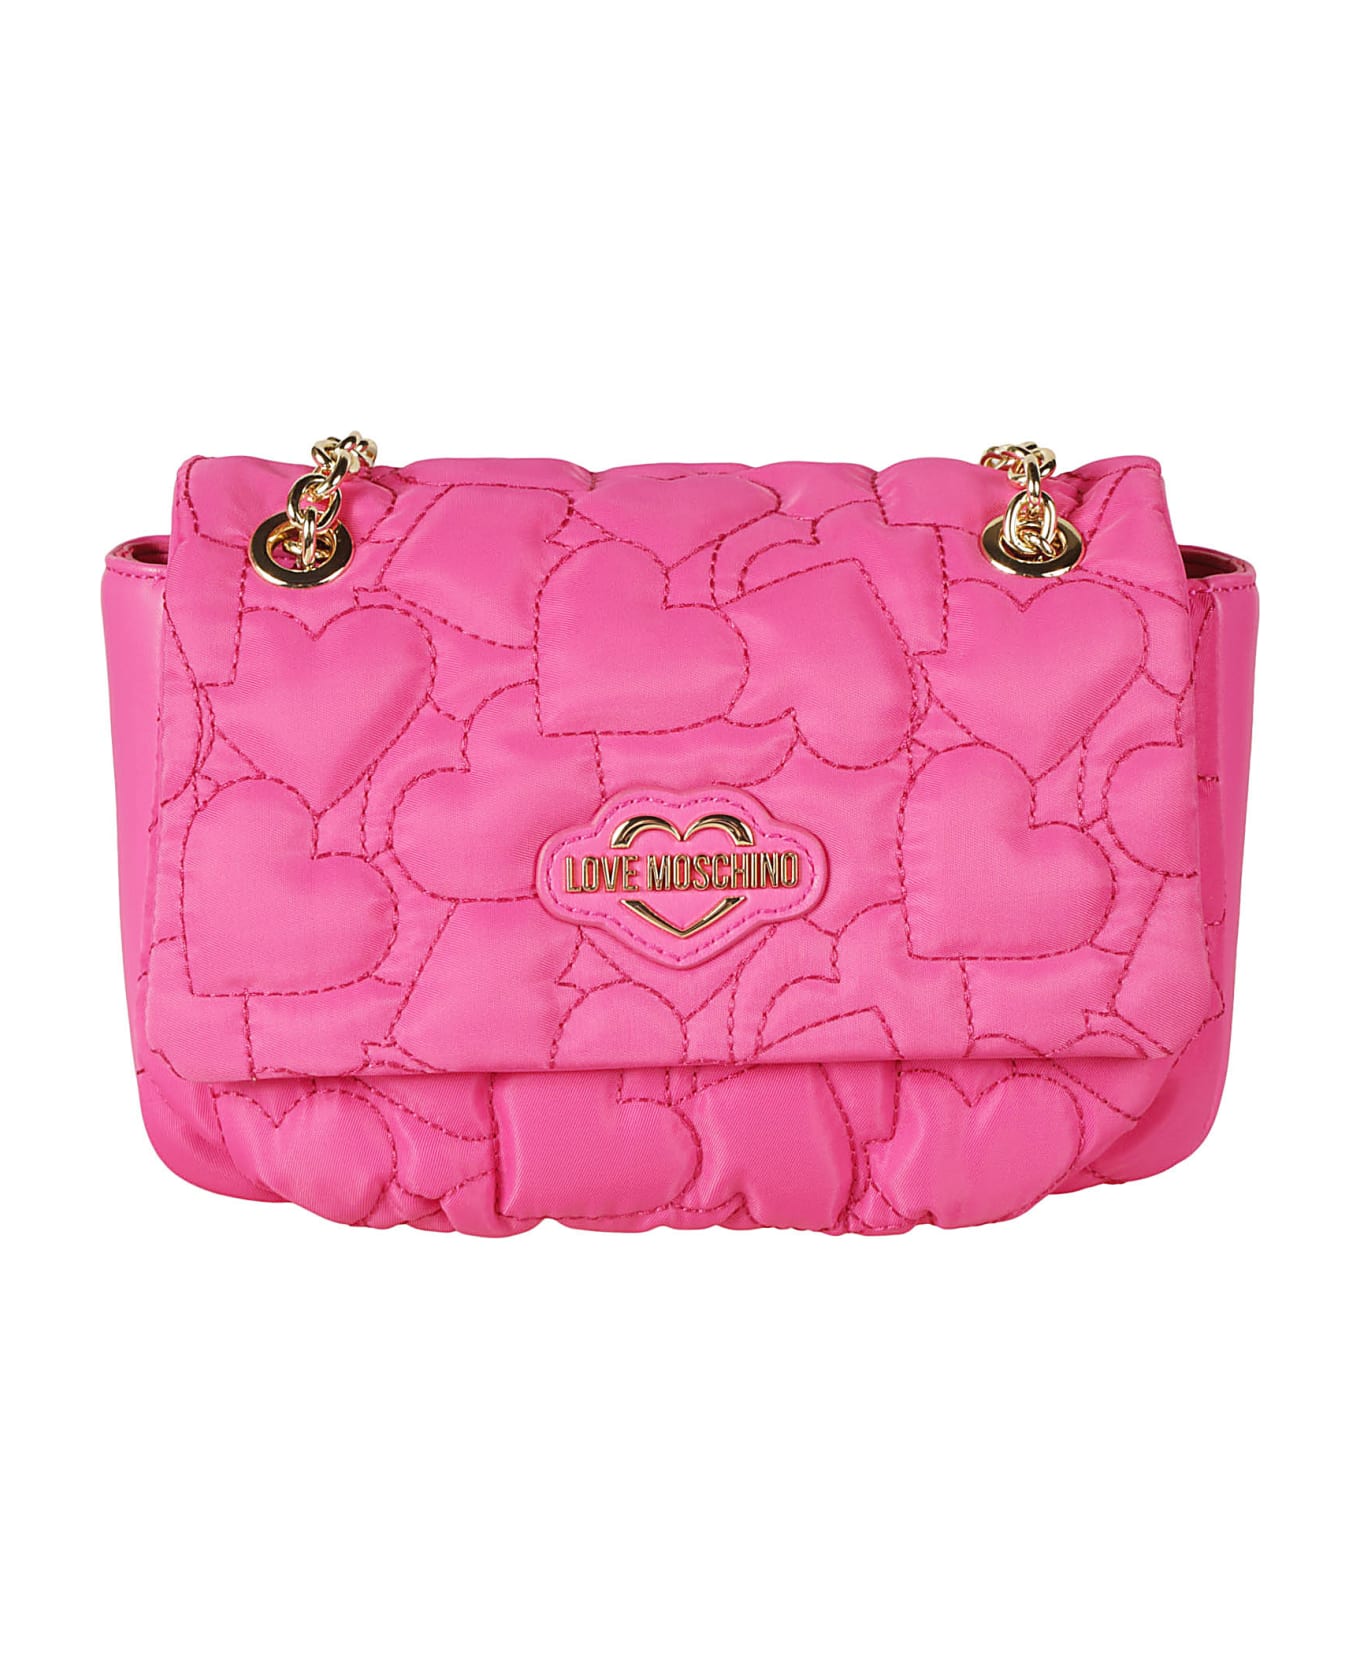 Love Moschino Heart Embroidered Flap Chain Shoulder Bag - Fuxia